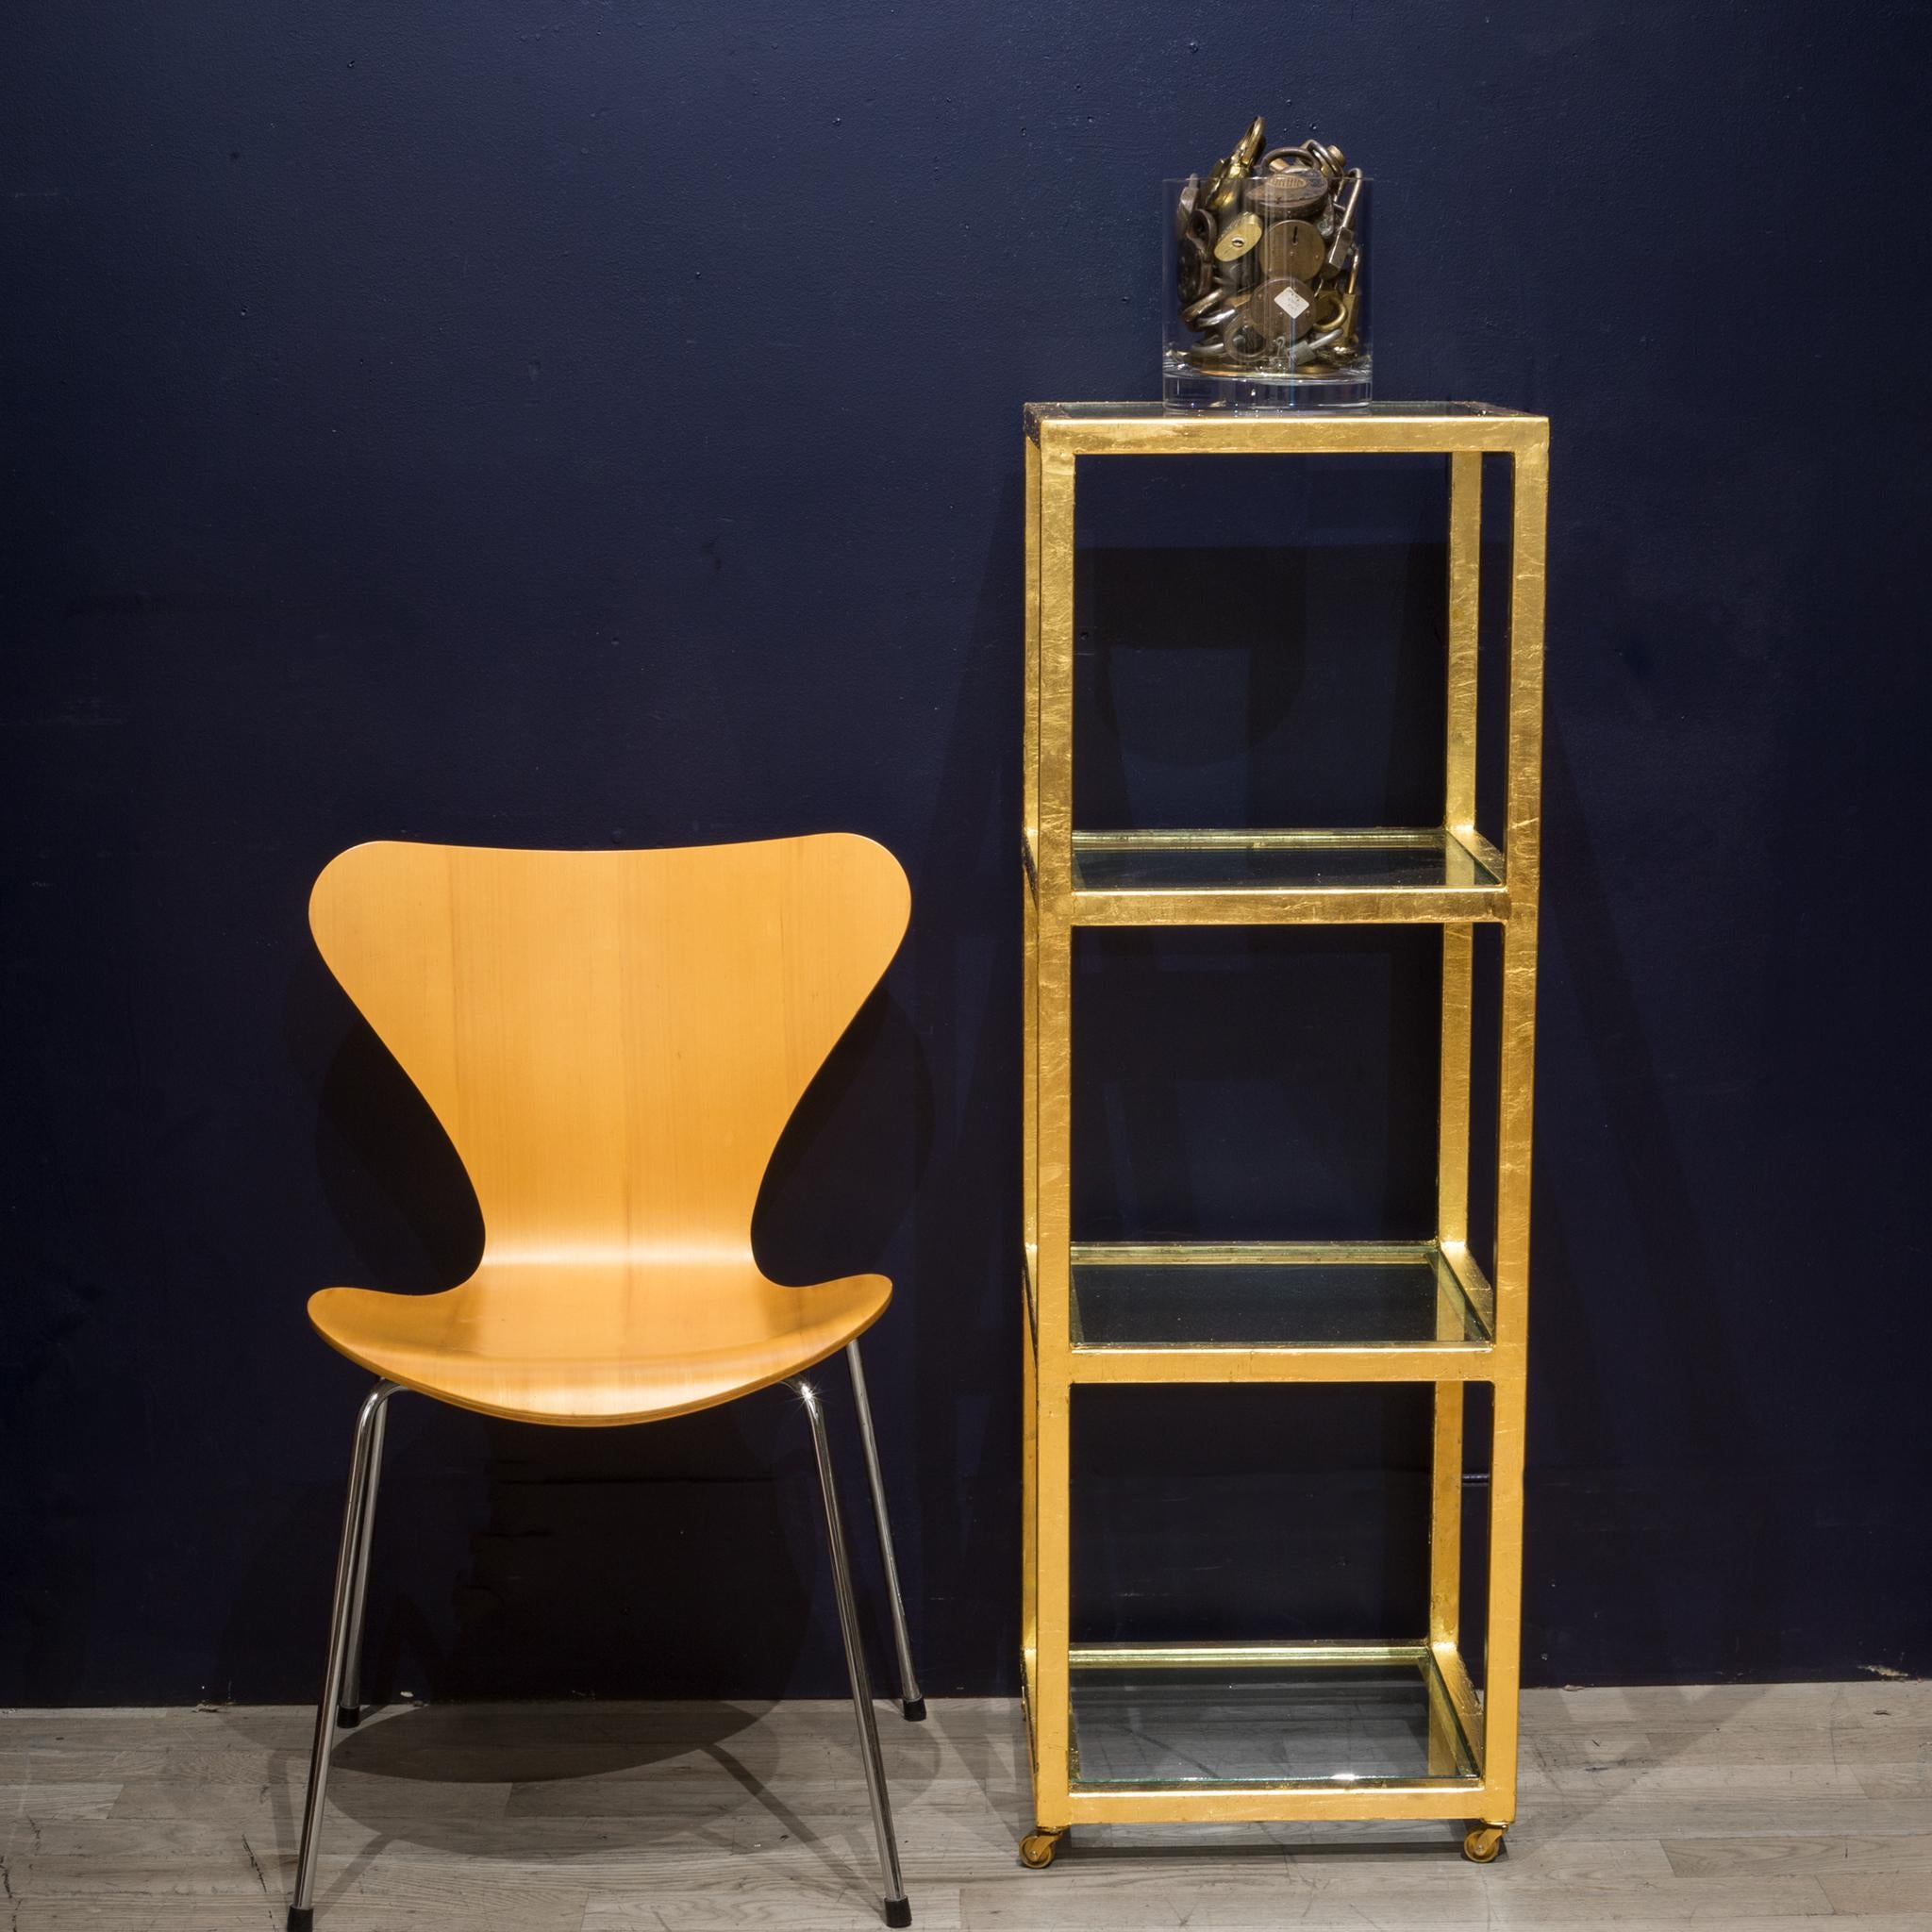 About

An original custom steel rolling cart with four glass shelves. Hand gold leafed with brass casters. Great as a barcart or bathroom cart.

Creator Luke Anthony, San Francisco.
Date of manufacture circa 2014.
Materials and techniques